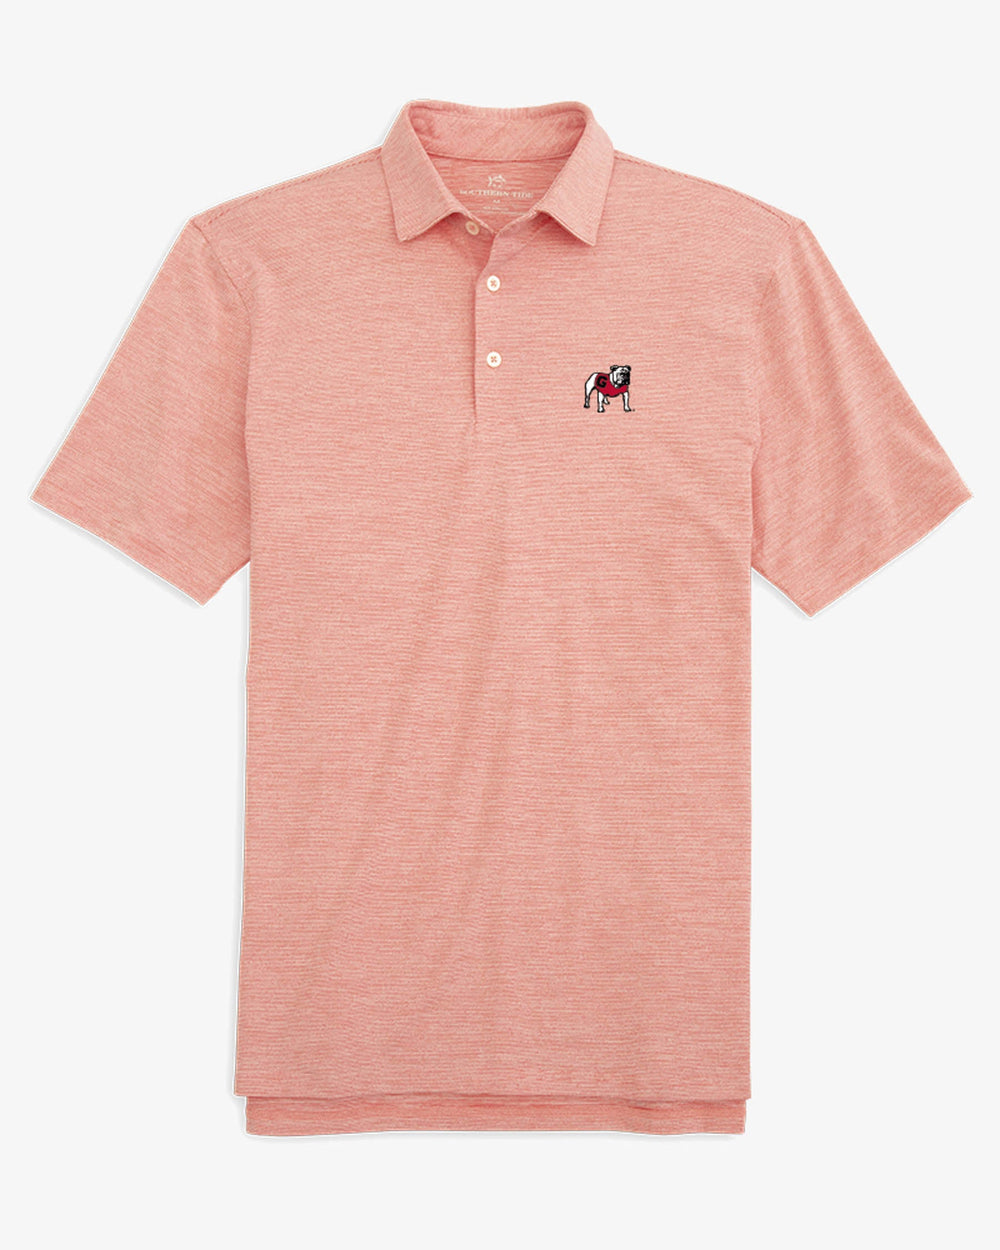 The front view of the Georgia Bulldogs Driver Spacedye Polo Shirt by Southern Tide - Varsity Red